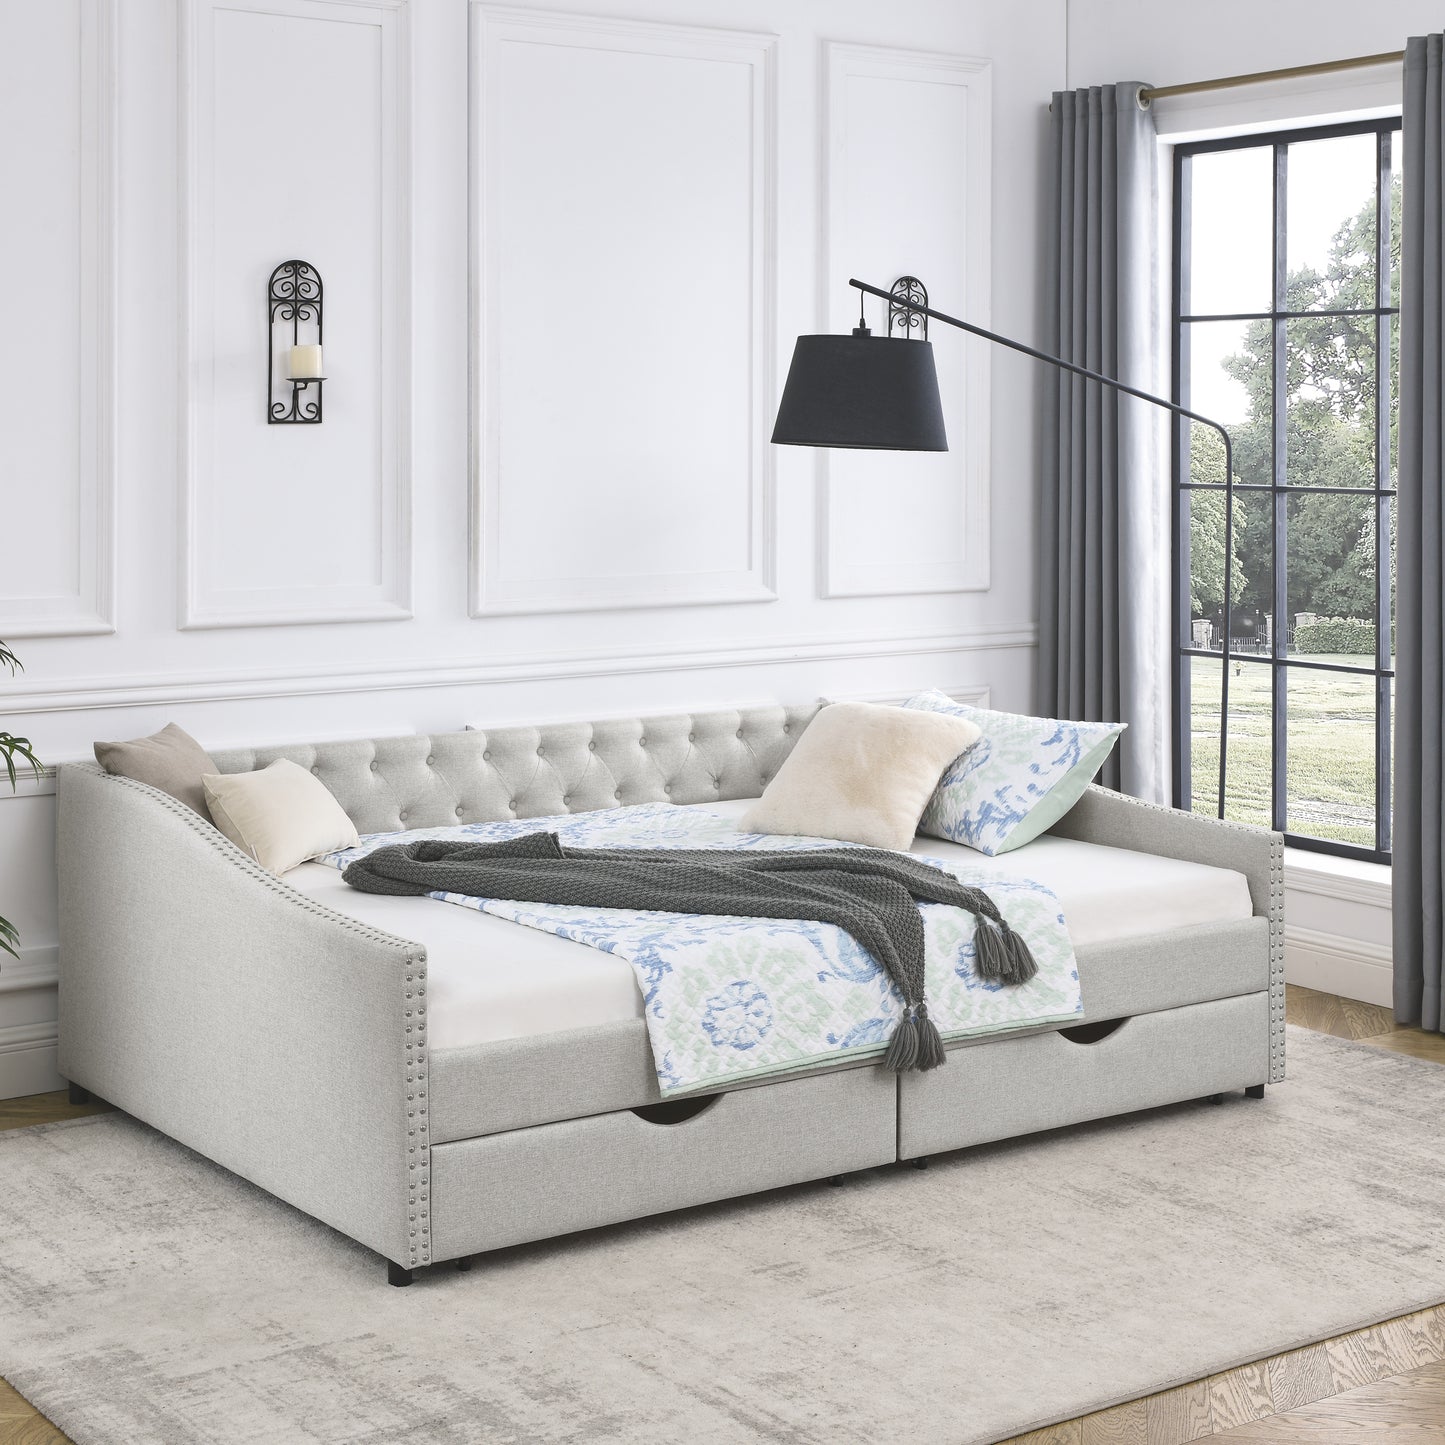 upholstered tufted daybed sofa bed  with drawers, beige